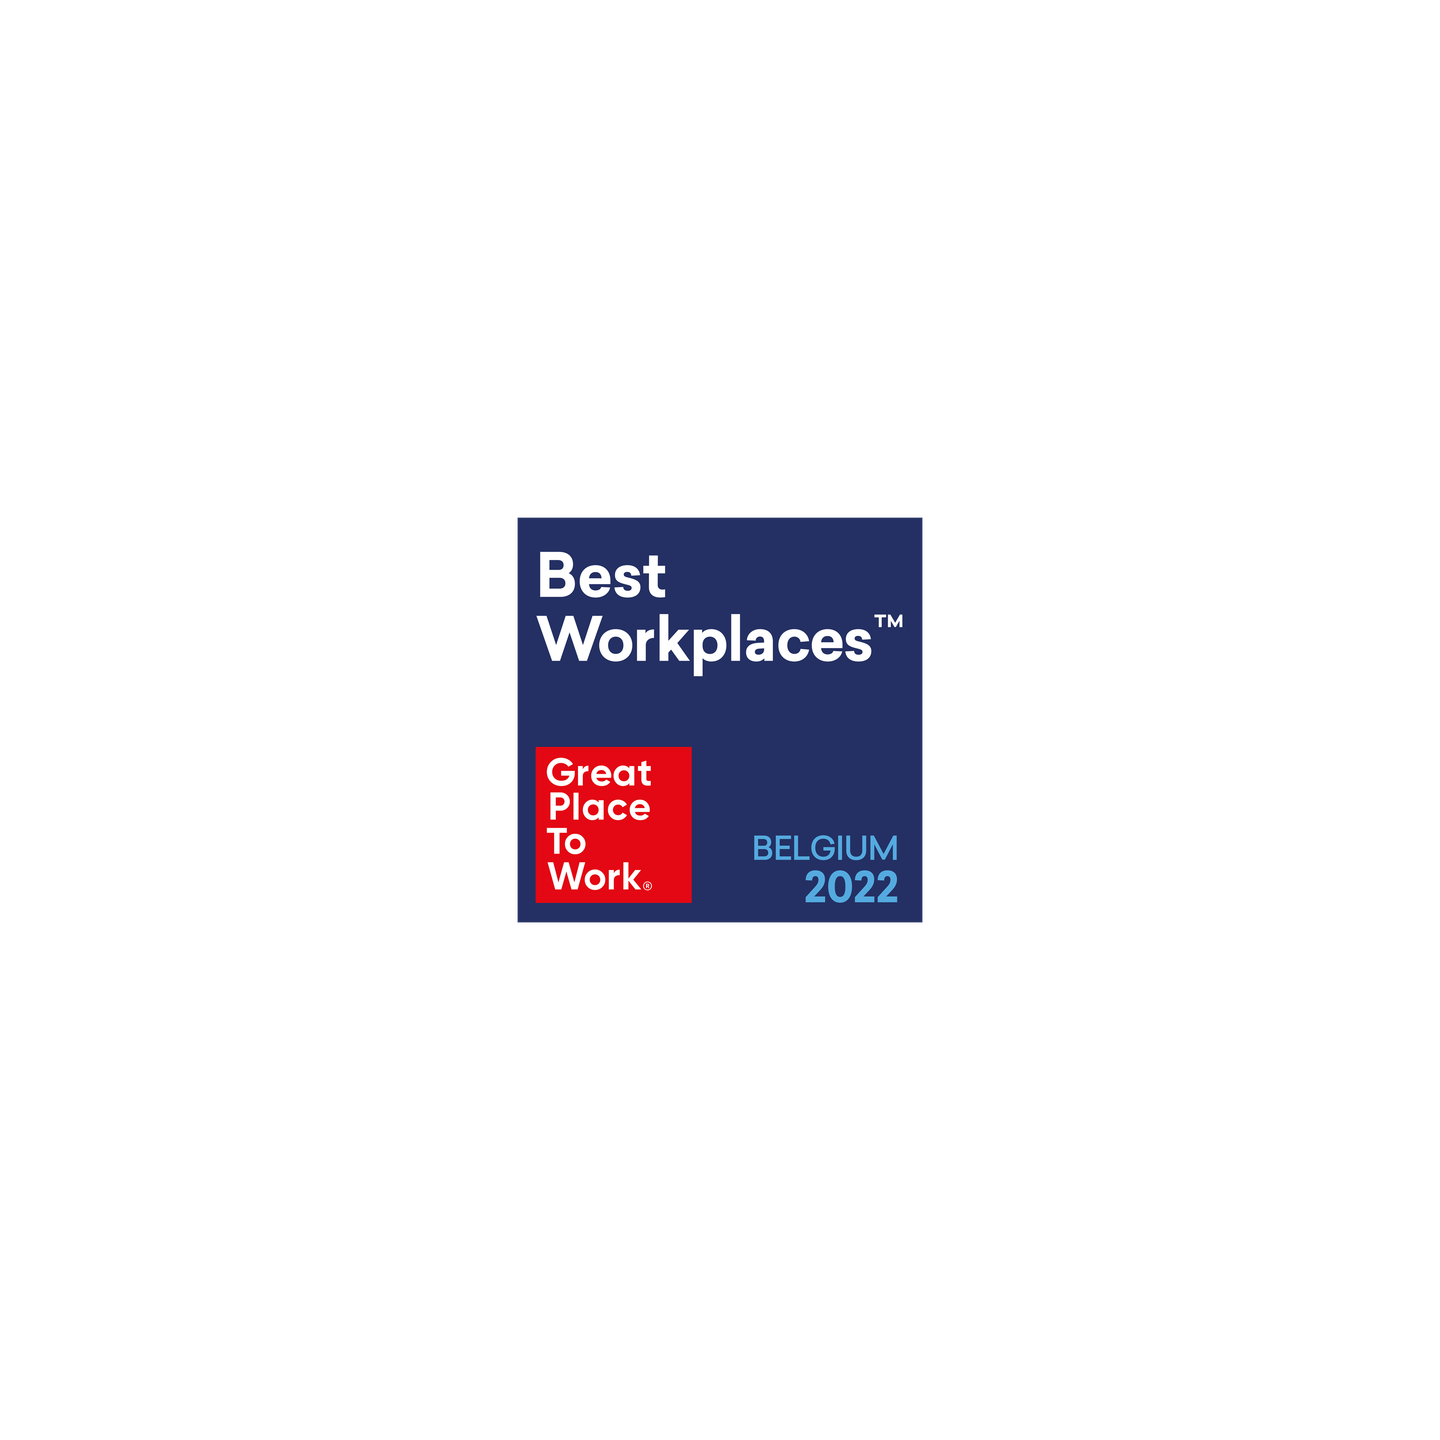 Best Workplaces 2022 small